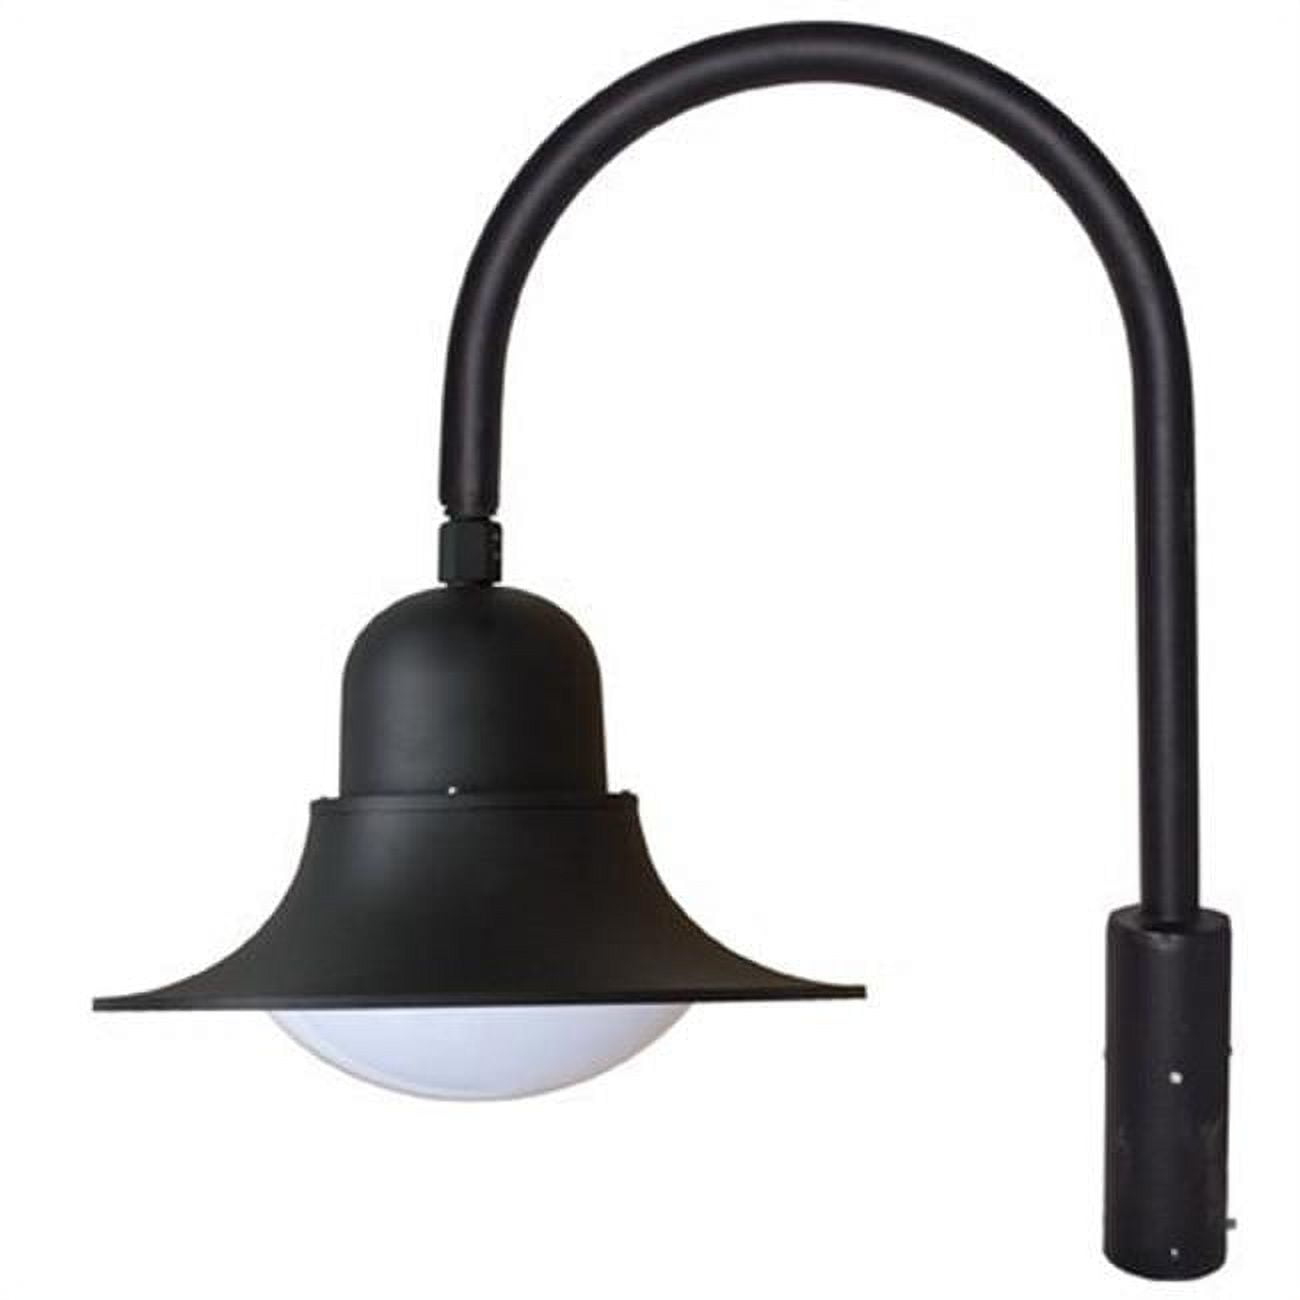 Picture of Dabmar Lighting GM614-B 70W 120V Powder Coated Cast Aluminum Post Top Light Fixture with High Pressure Sodium Lamp, Black - 35.50 x 22 x 30.92 in.